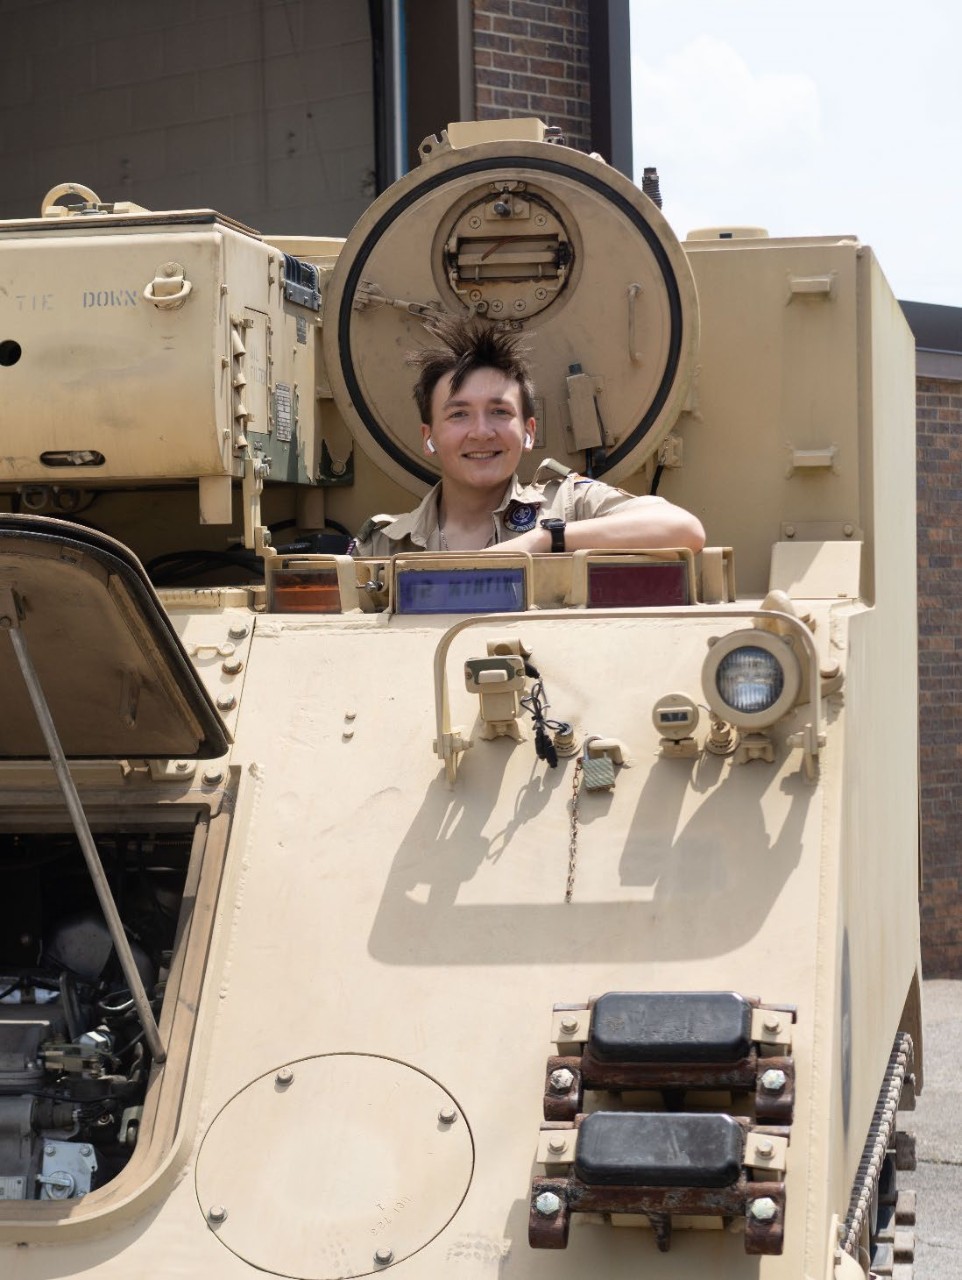 A scout from the Middle Tennessee Council explores an armored vehicle at the 3rd Annual Merit Badge University hosted by the Tennessee Military Department at Nashville’s Joint Force Headquarters, April 27. (photo by Staff Sgt. Matthew Brown)